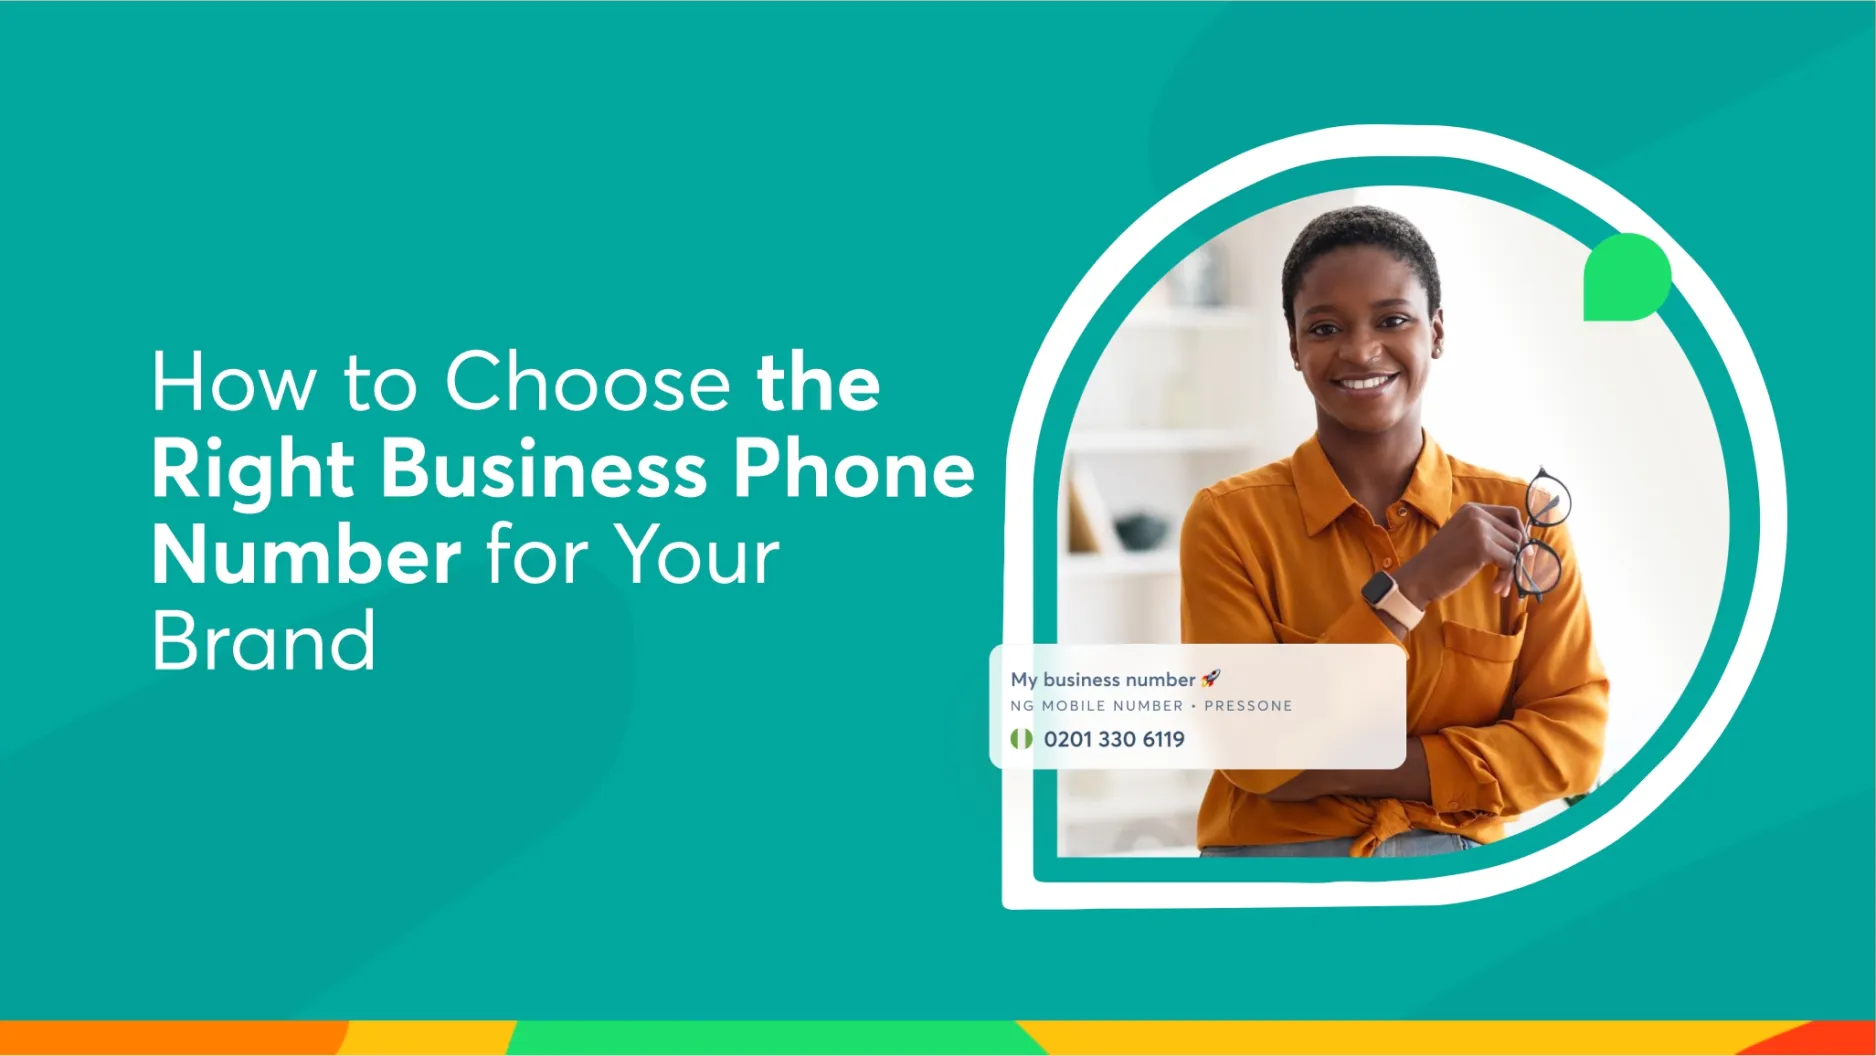 How to Choose the Right Business Phone Number